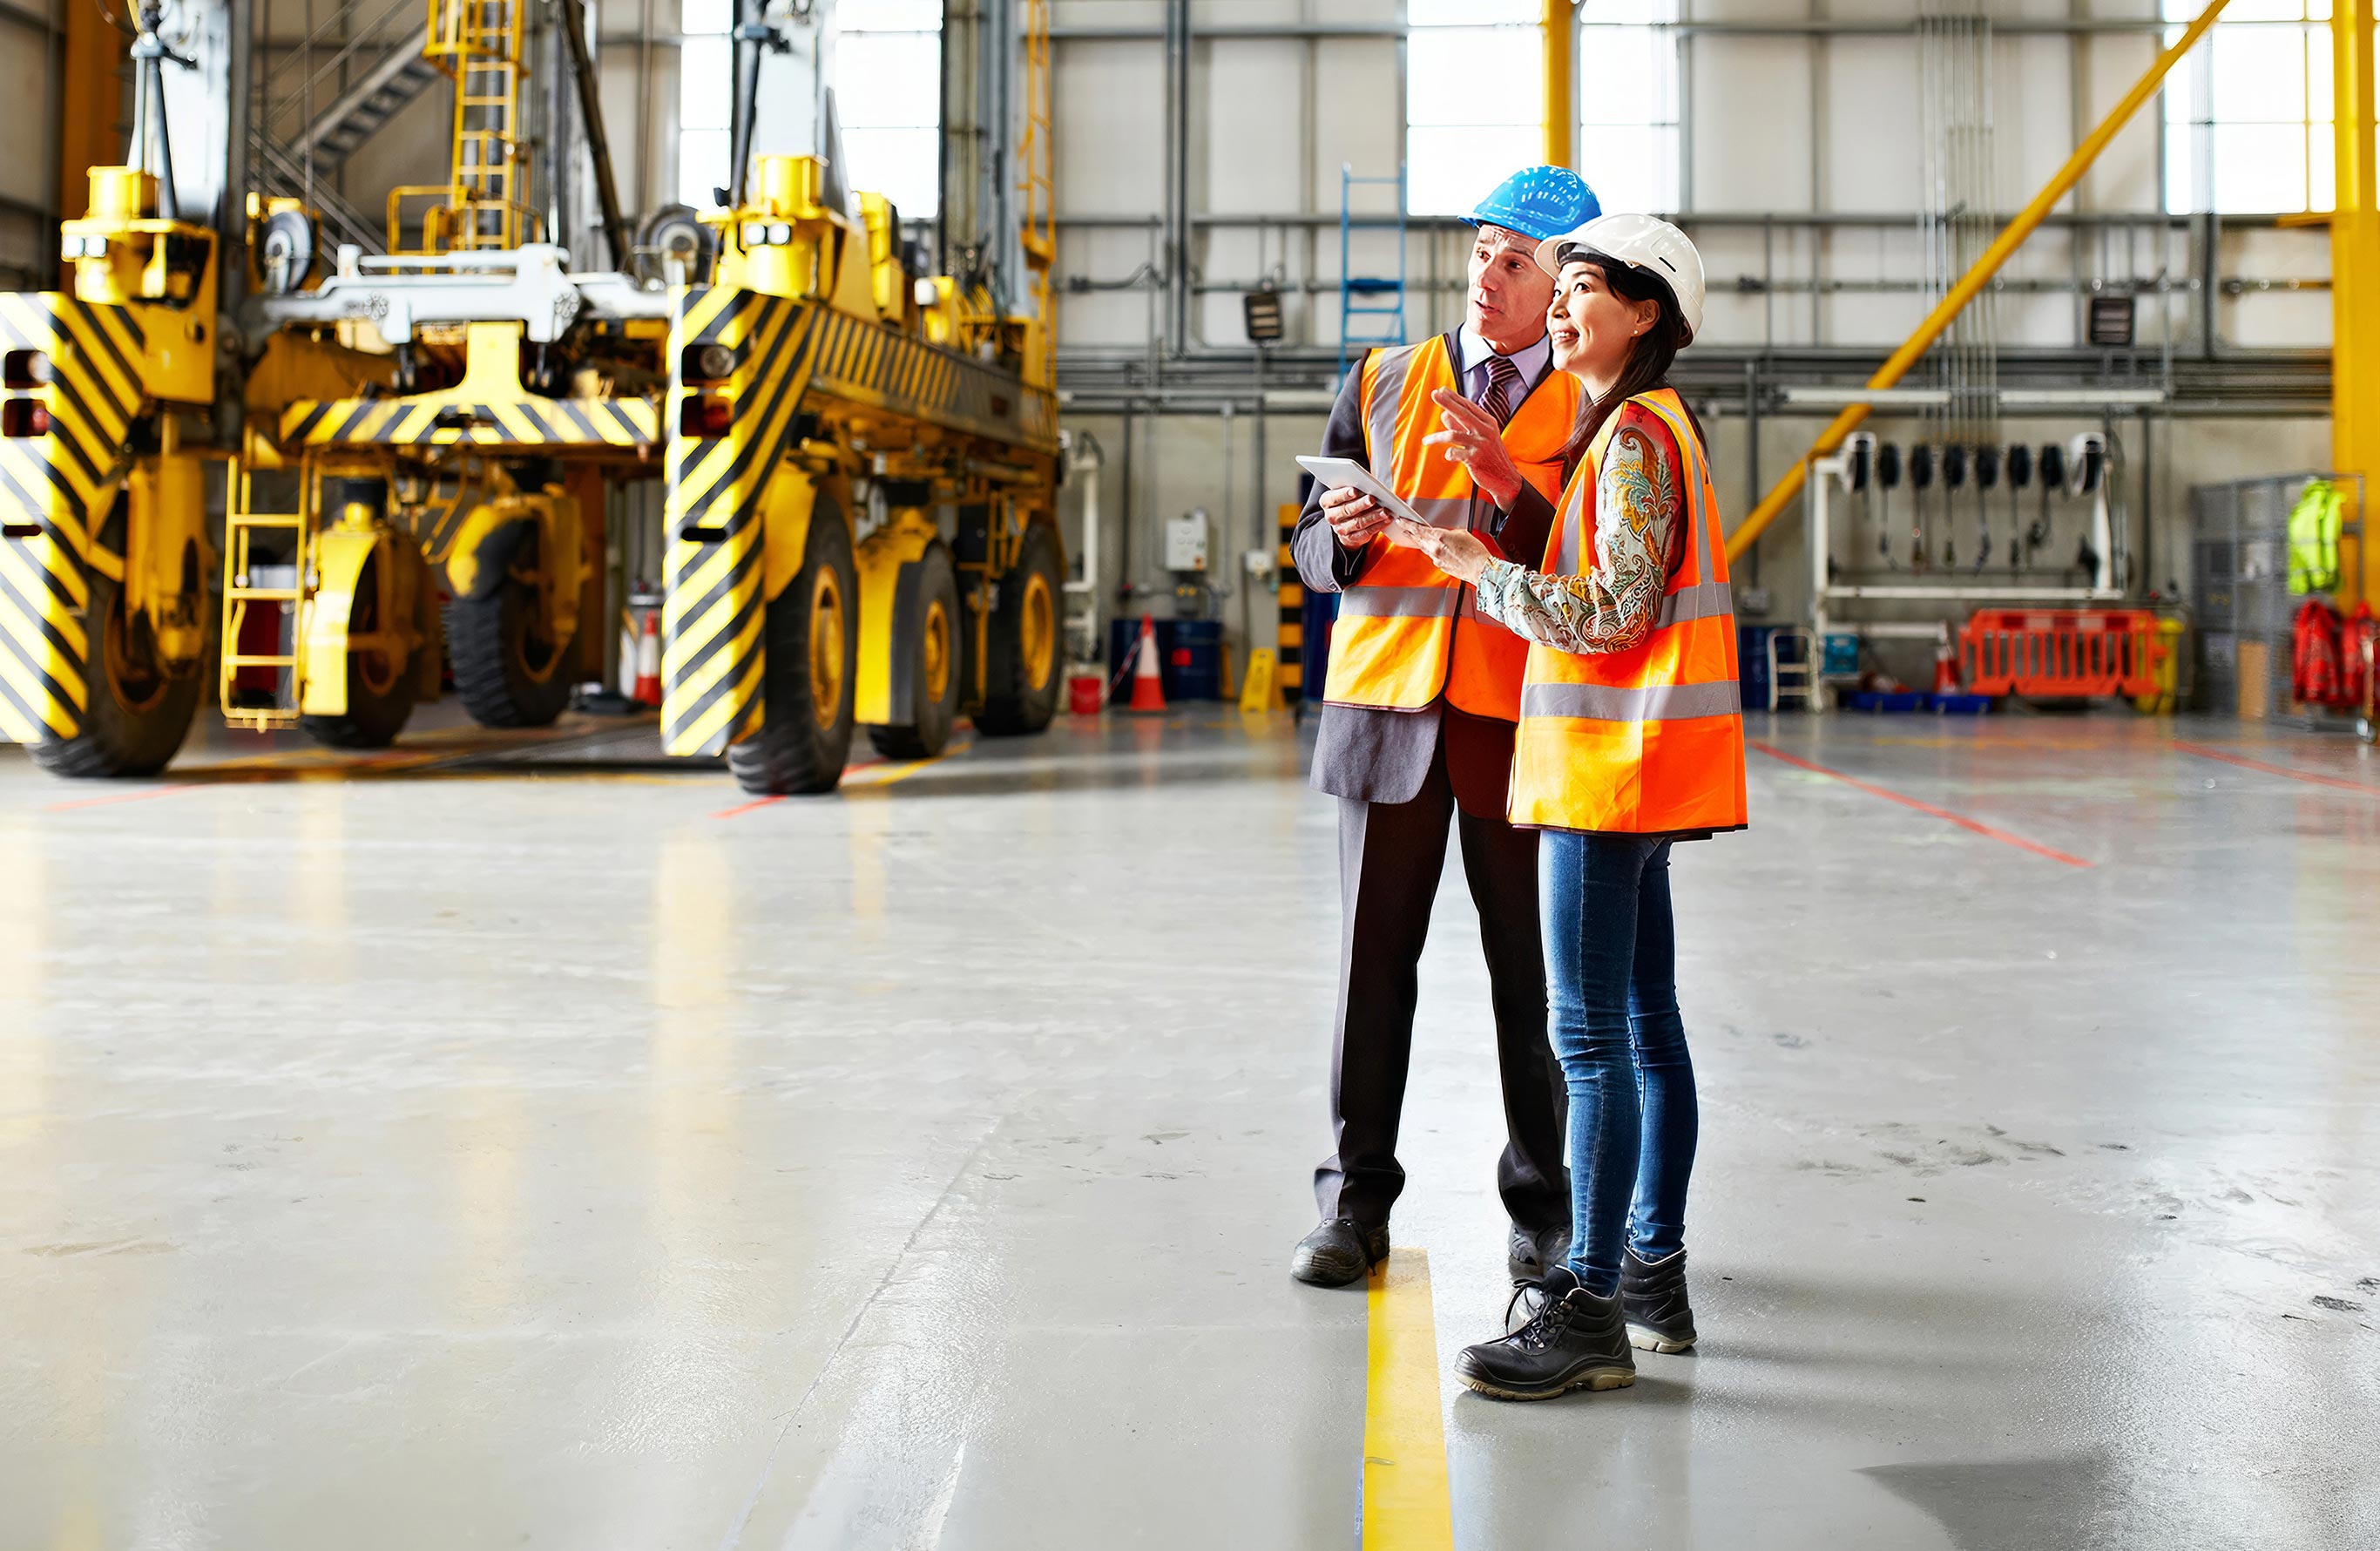 Header Image. Factory floor with two managers in high vis vests